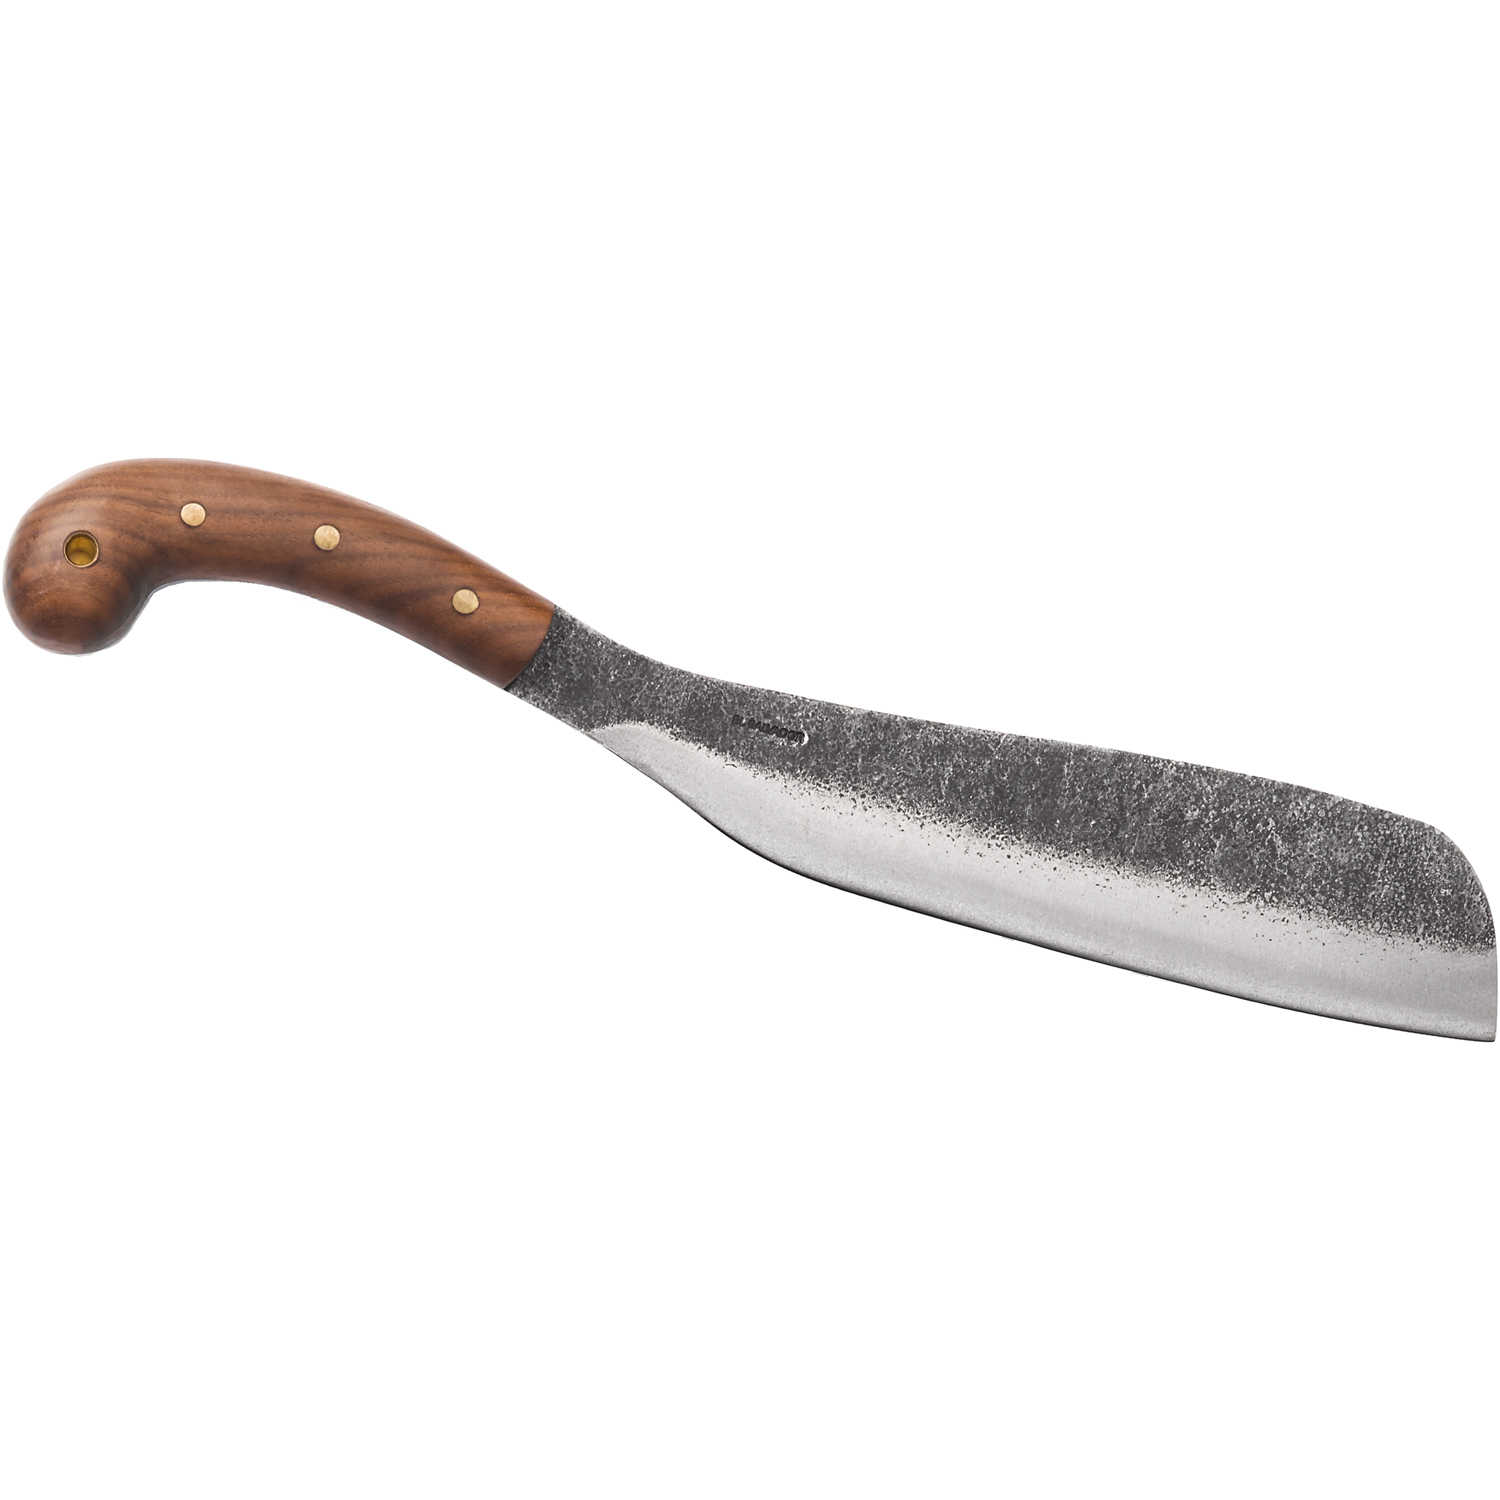 Condor Tool & Knife Machete Forestry Suppliers,